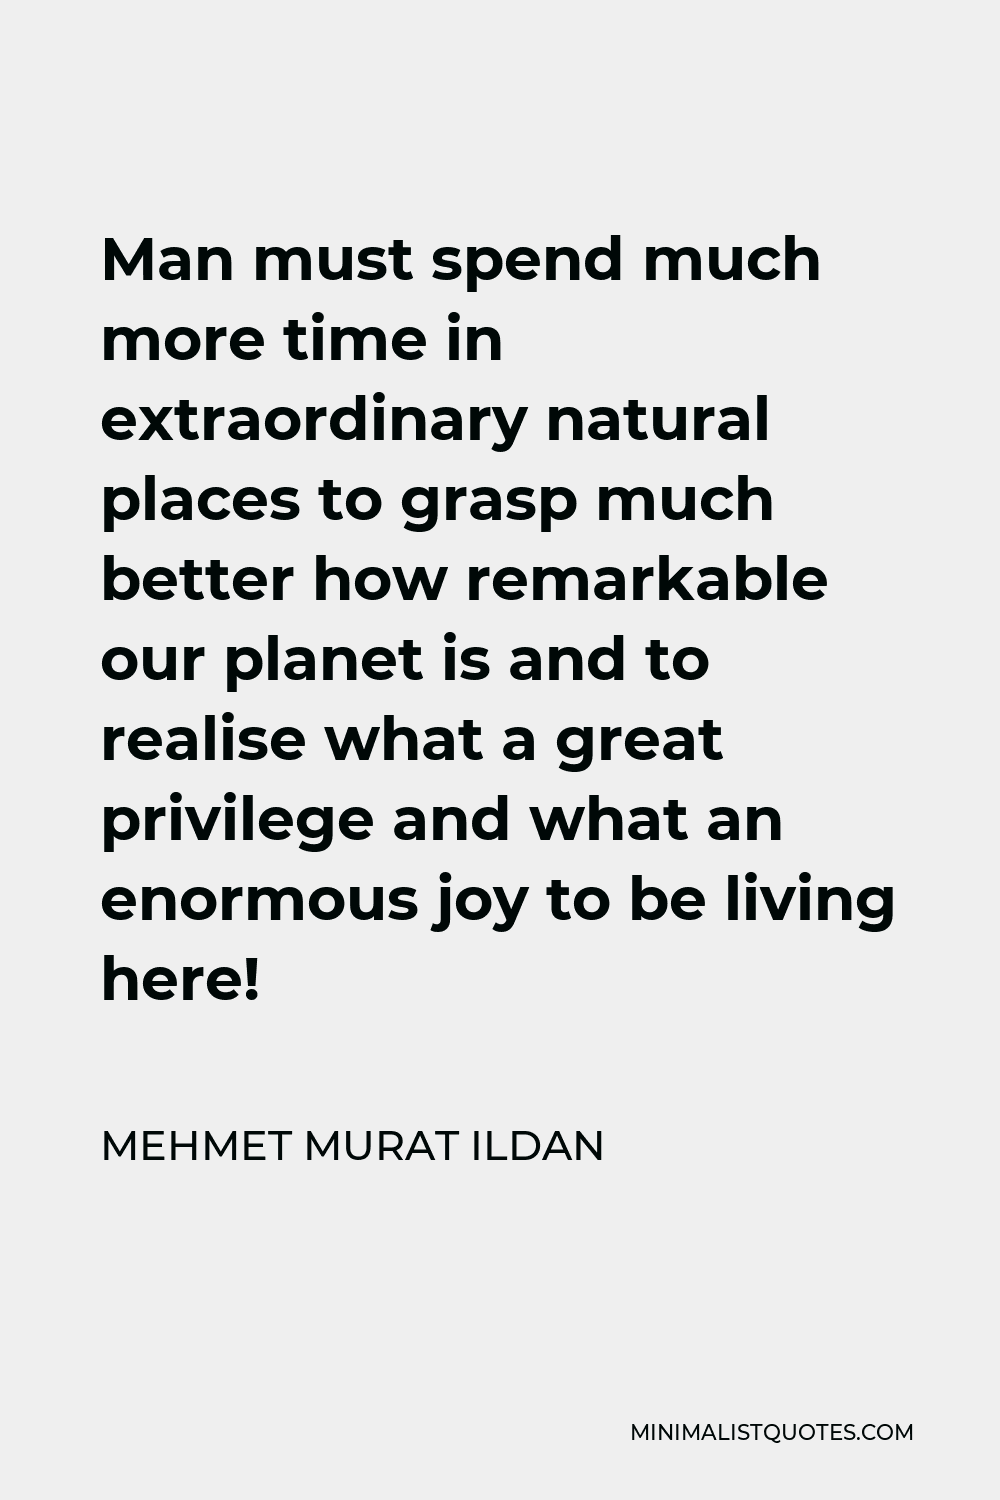 Mehmet Murat Ildan Quote - Man must spend much more time in extraordinary natural places to grasp much better how remarkable our planet is and to realise what a great privilege and what an enormous joy to be living here!